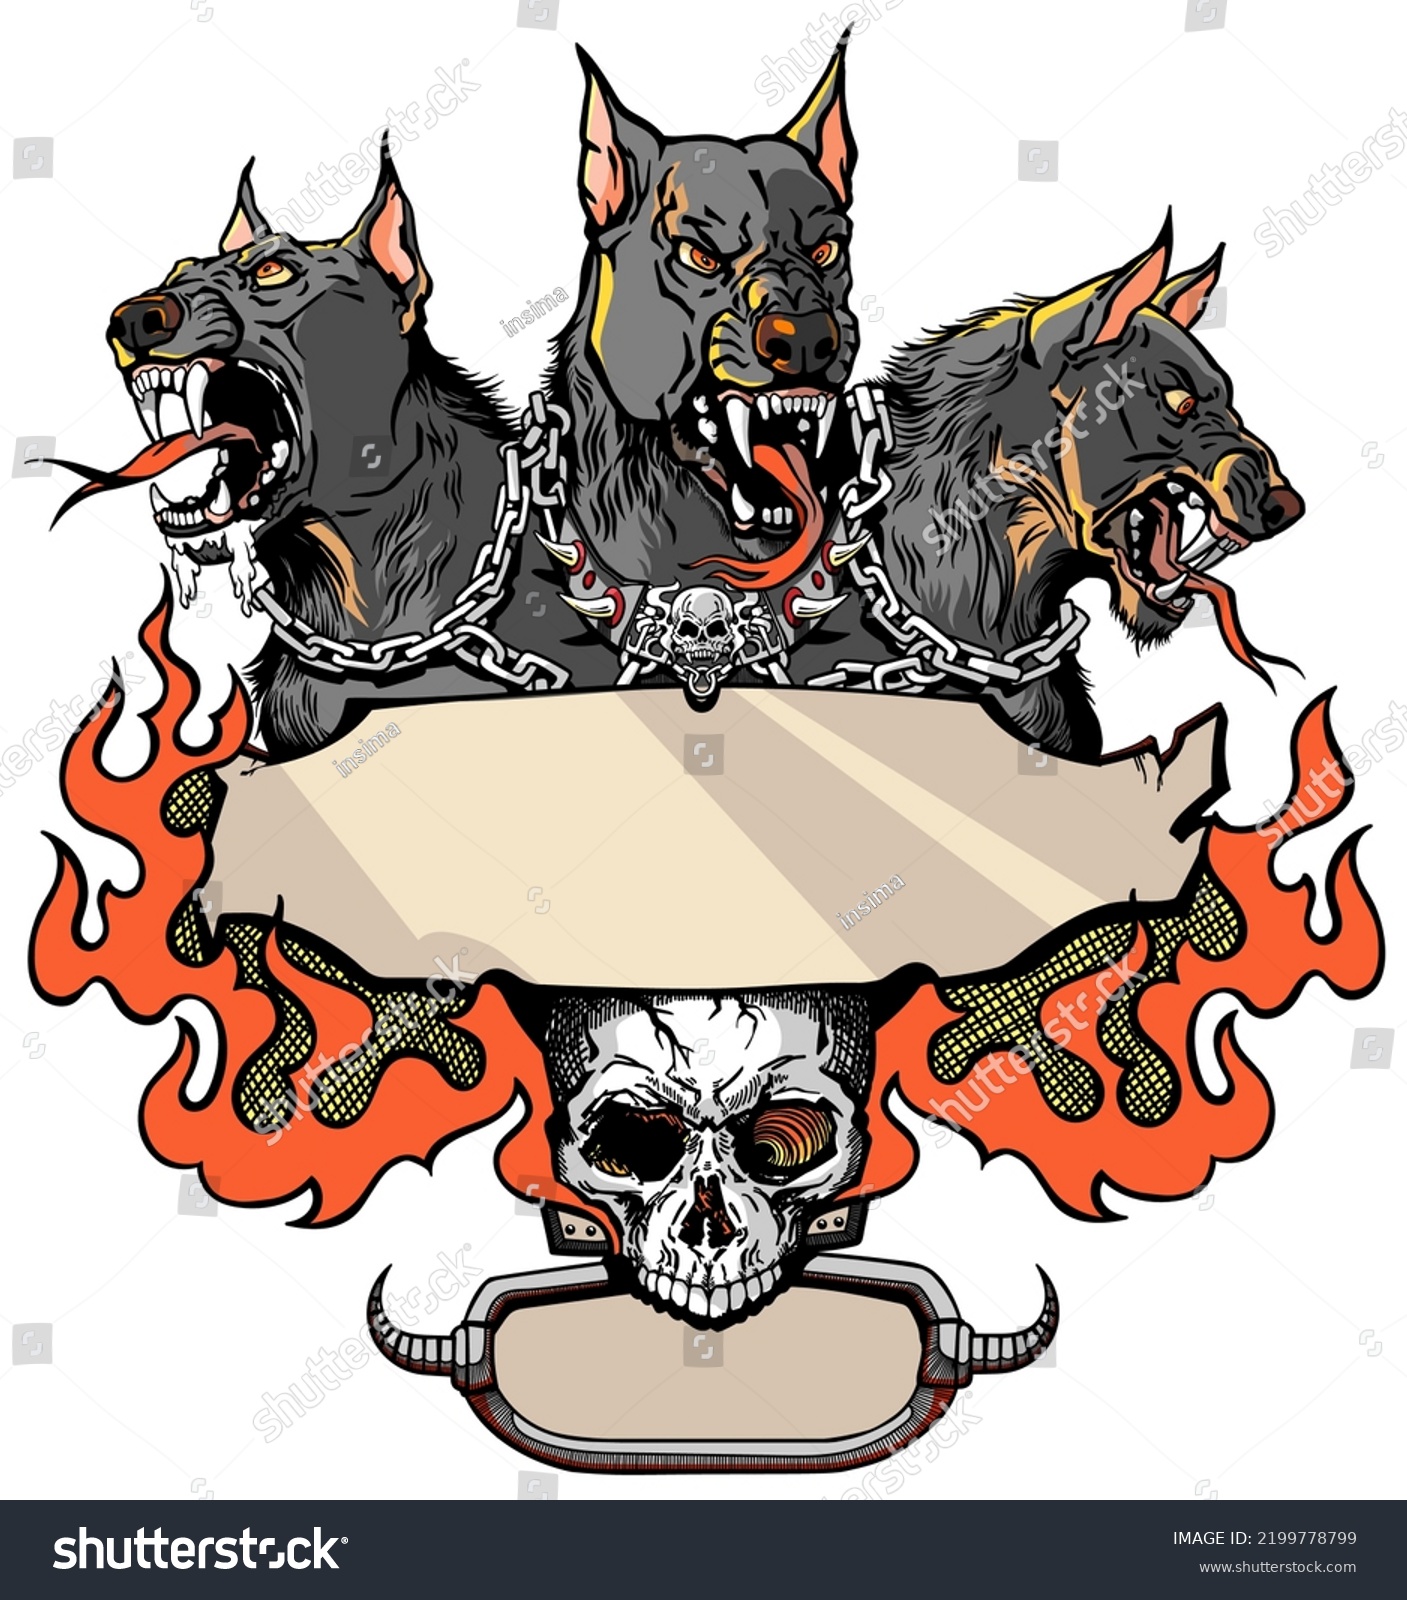 SVG of Cerberus hellhound a mythological three-headed dog the guard of the entrance to hell. Hound of Hades with chain on his neck. Design template with a human skull and fire flames.  Vector illustration svg